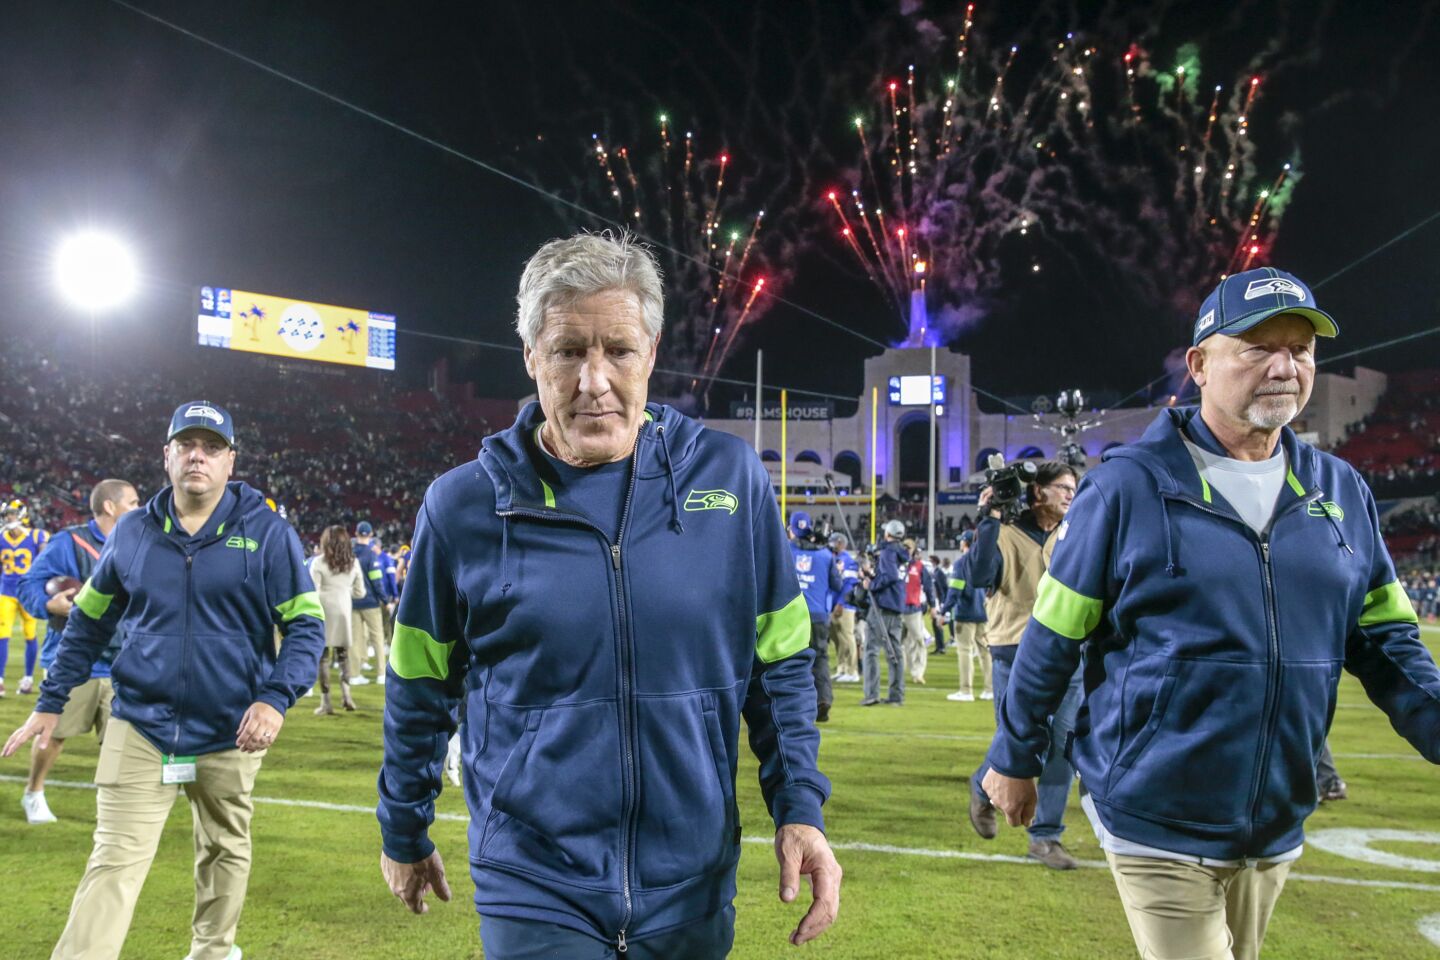 Seattle Seahawks coach Pete Carroll walks off the field at the Coliseum following the Rams' 28-12 victory.